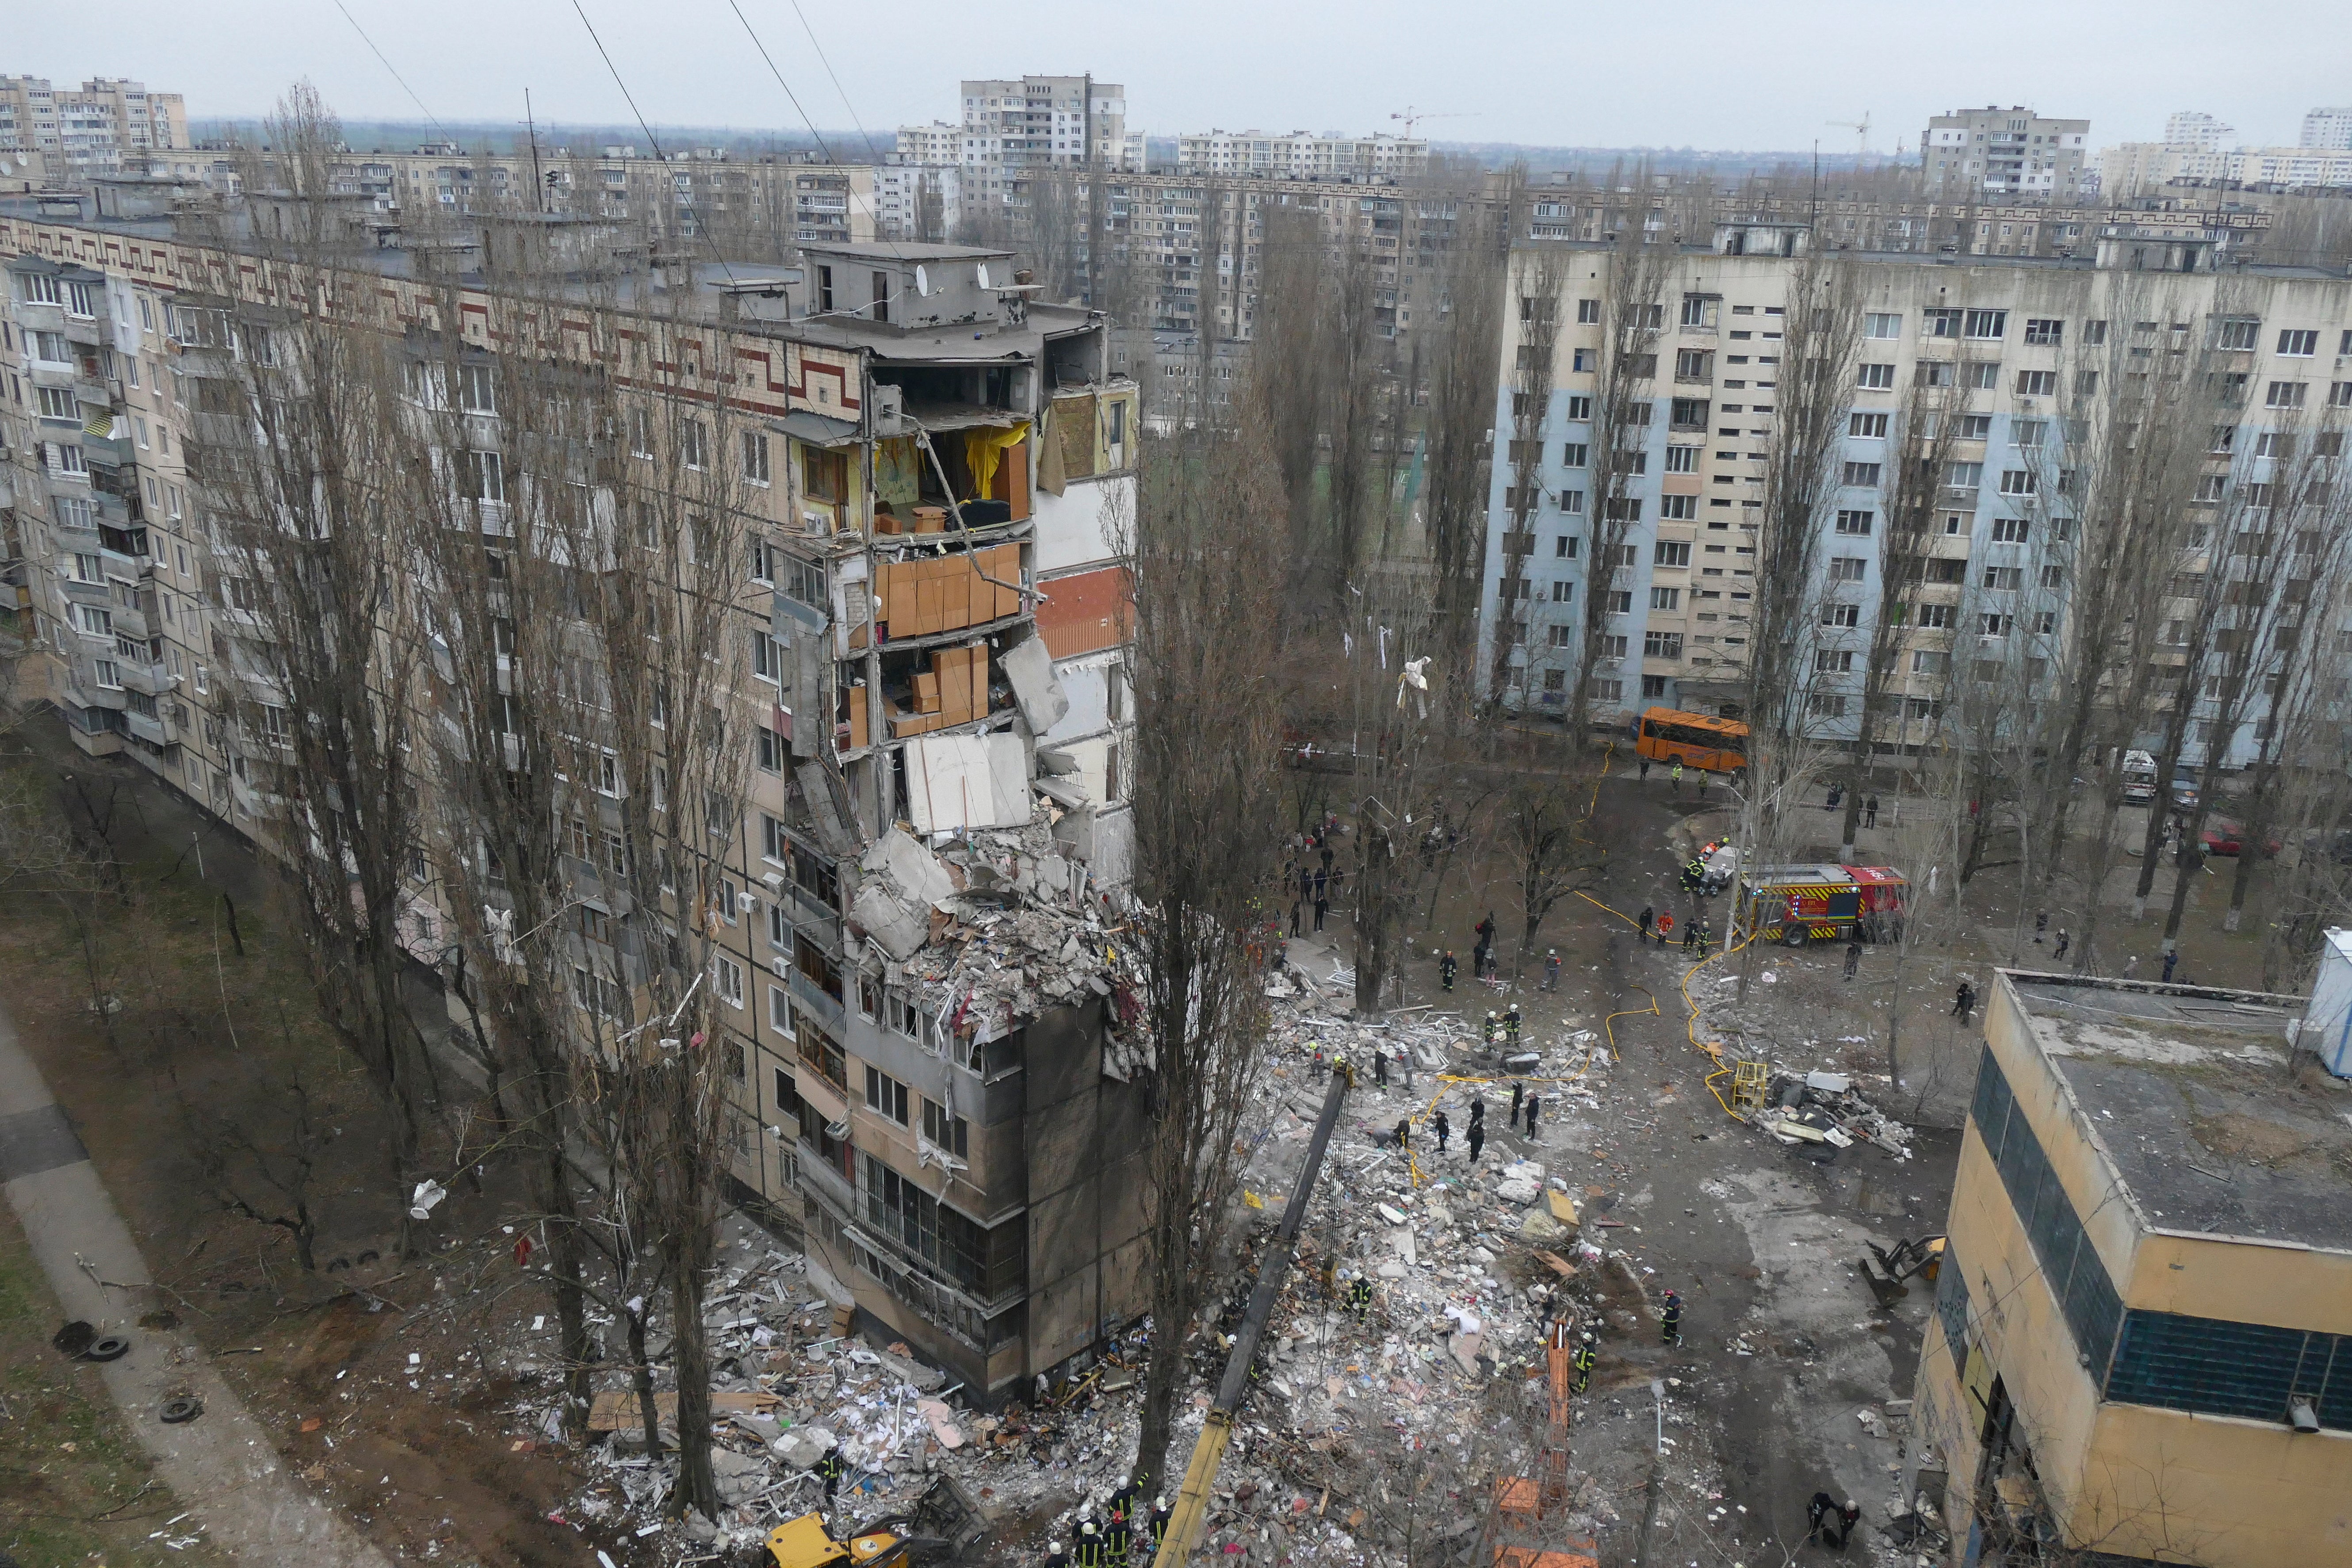 Ukrainian rescuers work on the site of a damaged residential building in Odesa after an overnight attack